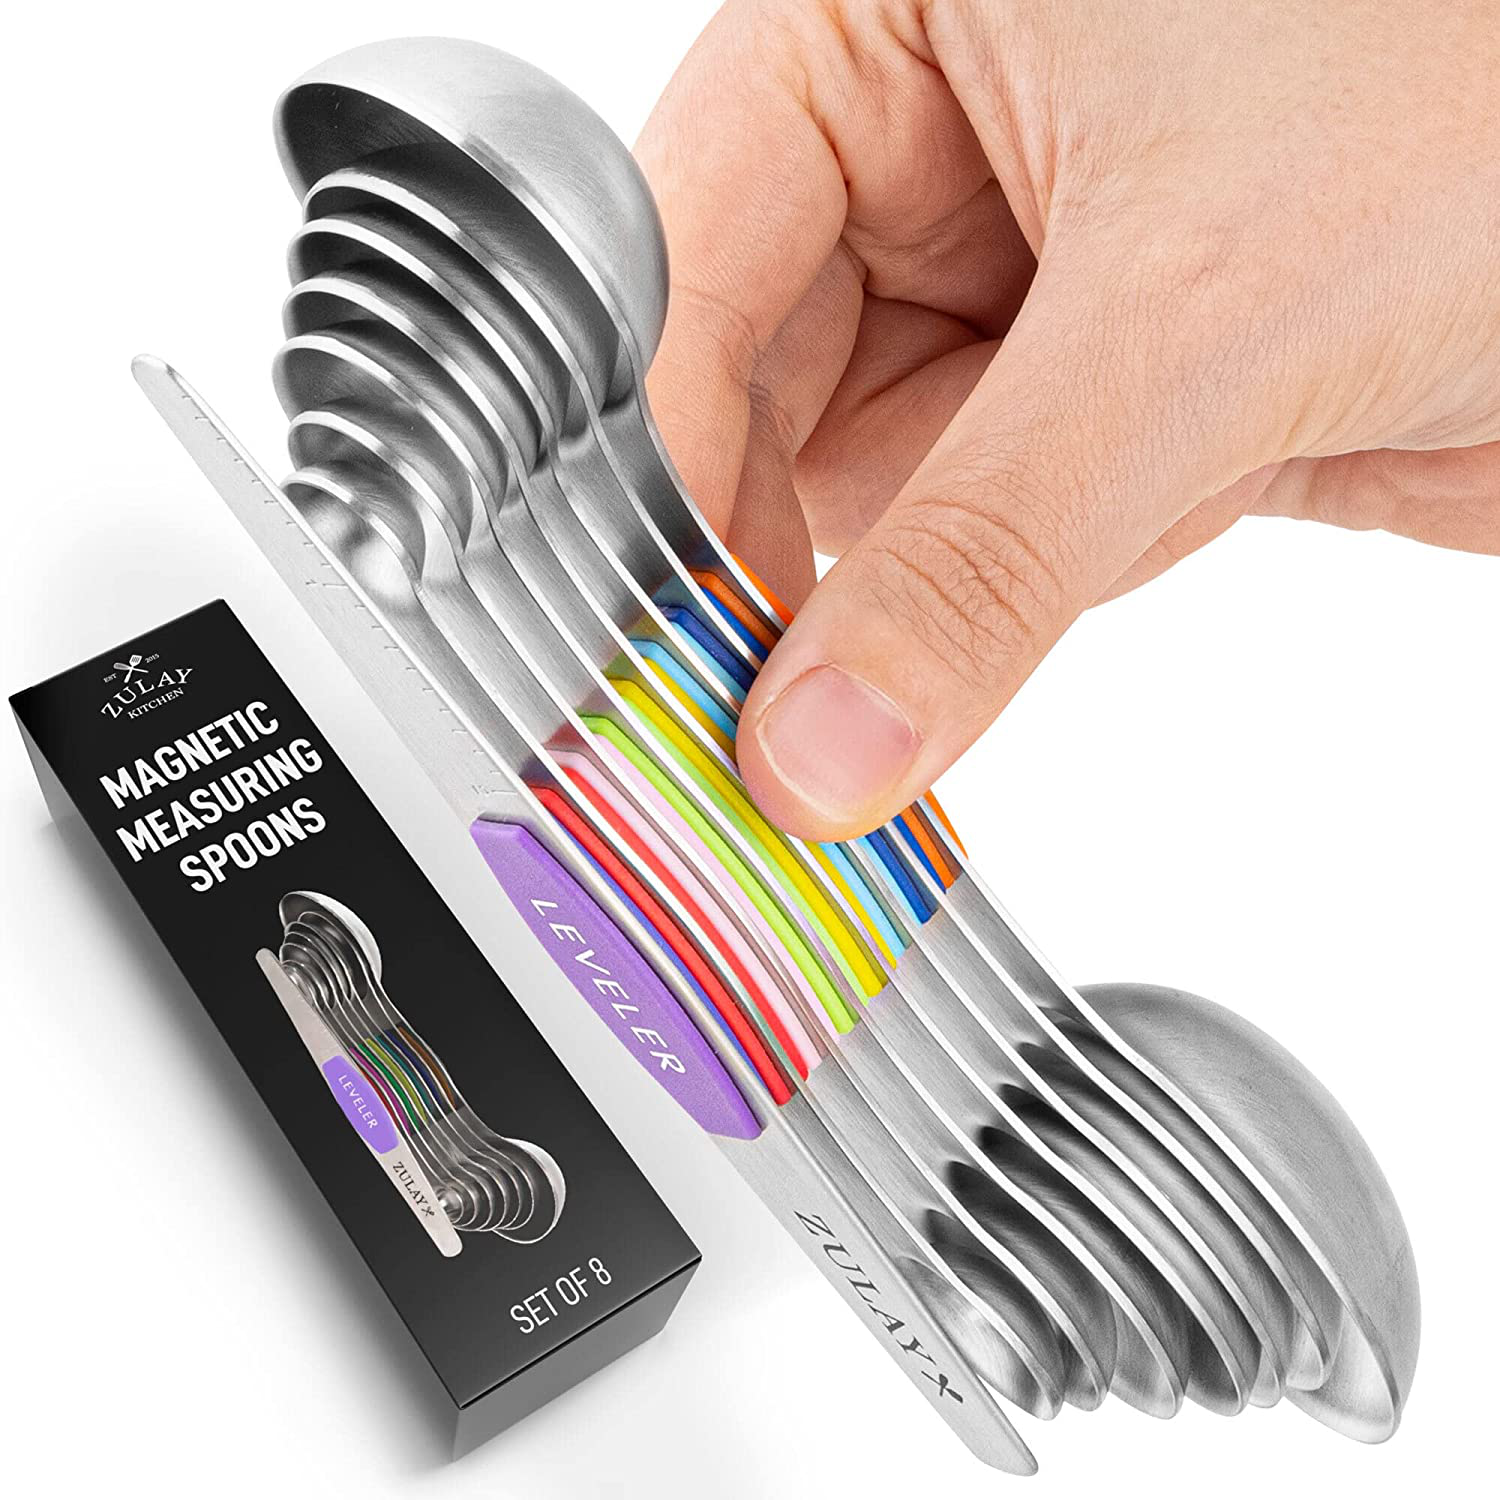 Zulay Kitchen Magnetic Measuring Spoons Set of 8 - Black, 1